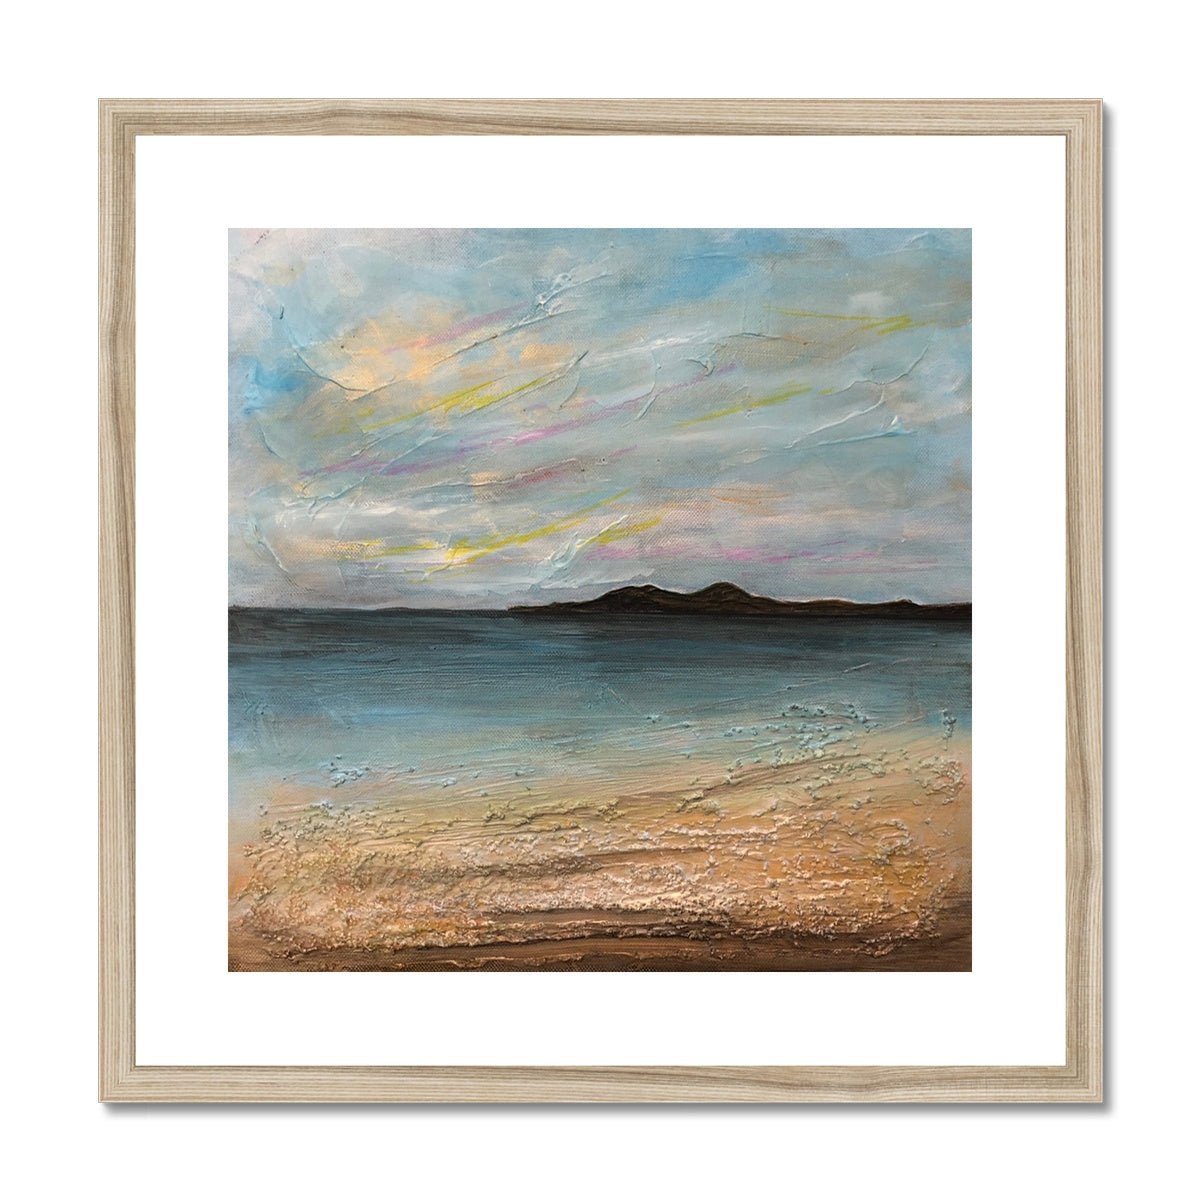 Garrynamonie Beach South Uist Painting | Framed & Mounted Prints From Scotland-Framed & Mounted Prints-Hebridean Islands Art Gallery-20"x20"-Natural Frame-Paintings, Prints, Homeware, Art Gifts From Scotland By Scottish Artist Kevin Hunter